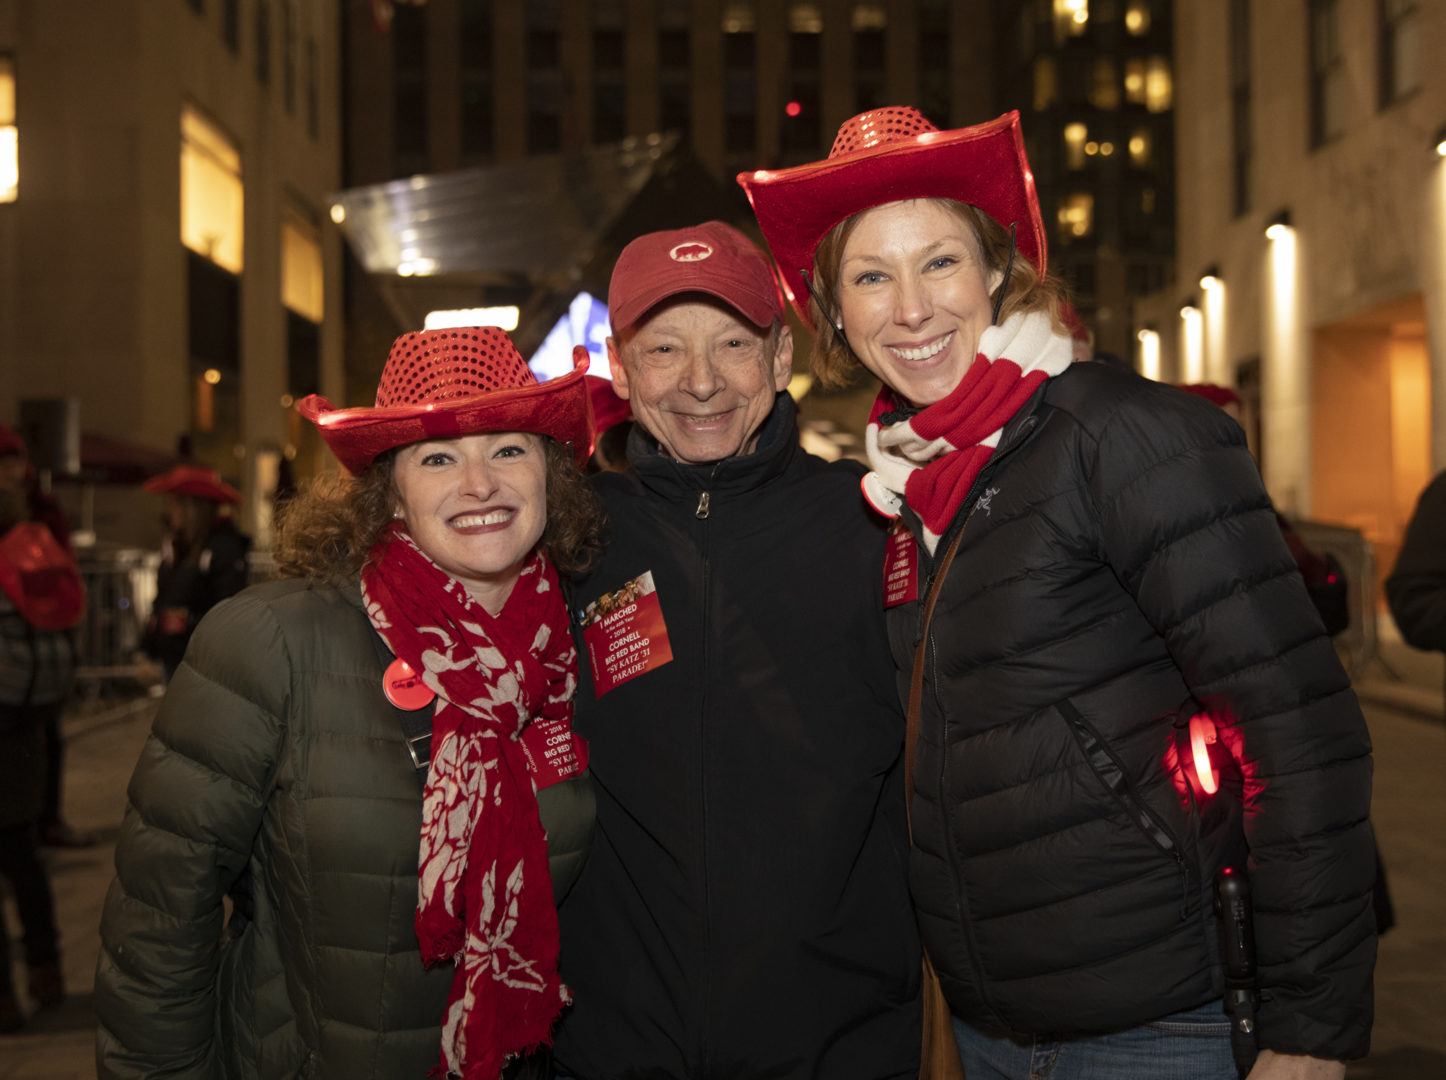 Cornell AAD staff and alumni wear red hats at the Sy Katz Parade